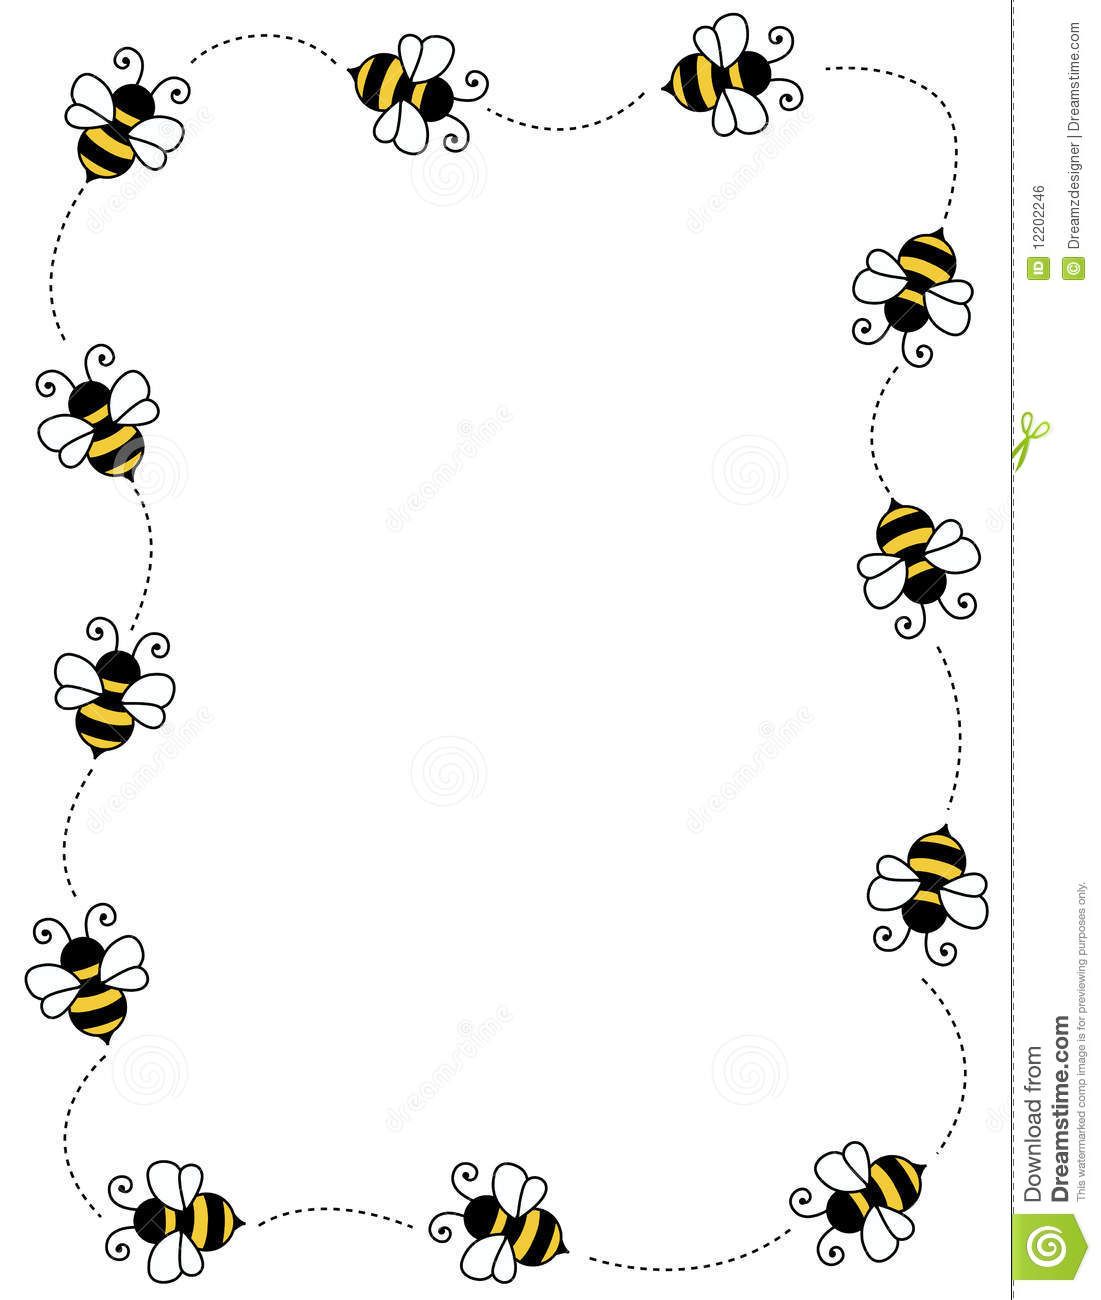 Bees clipart boarder, Bees boarder Transparent FREE for